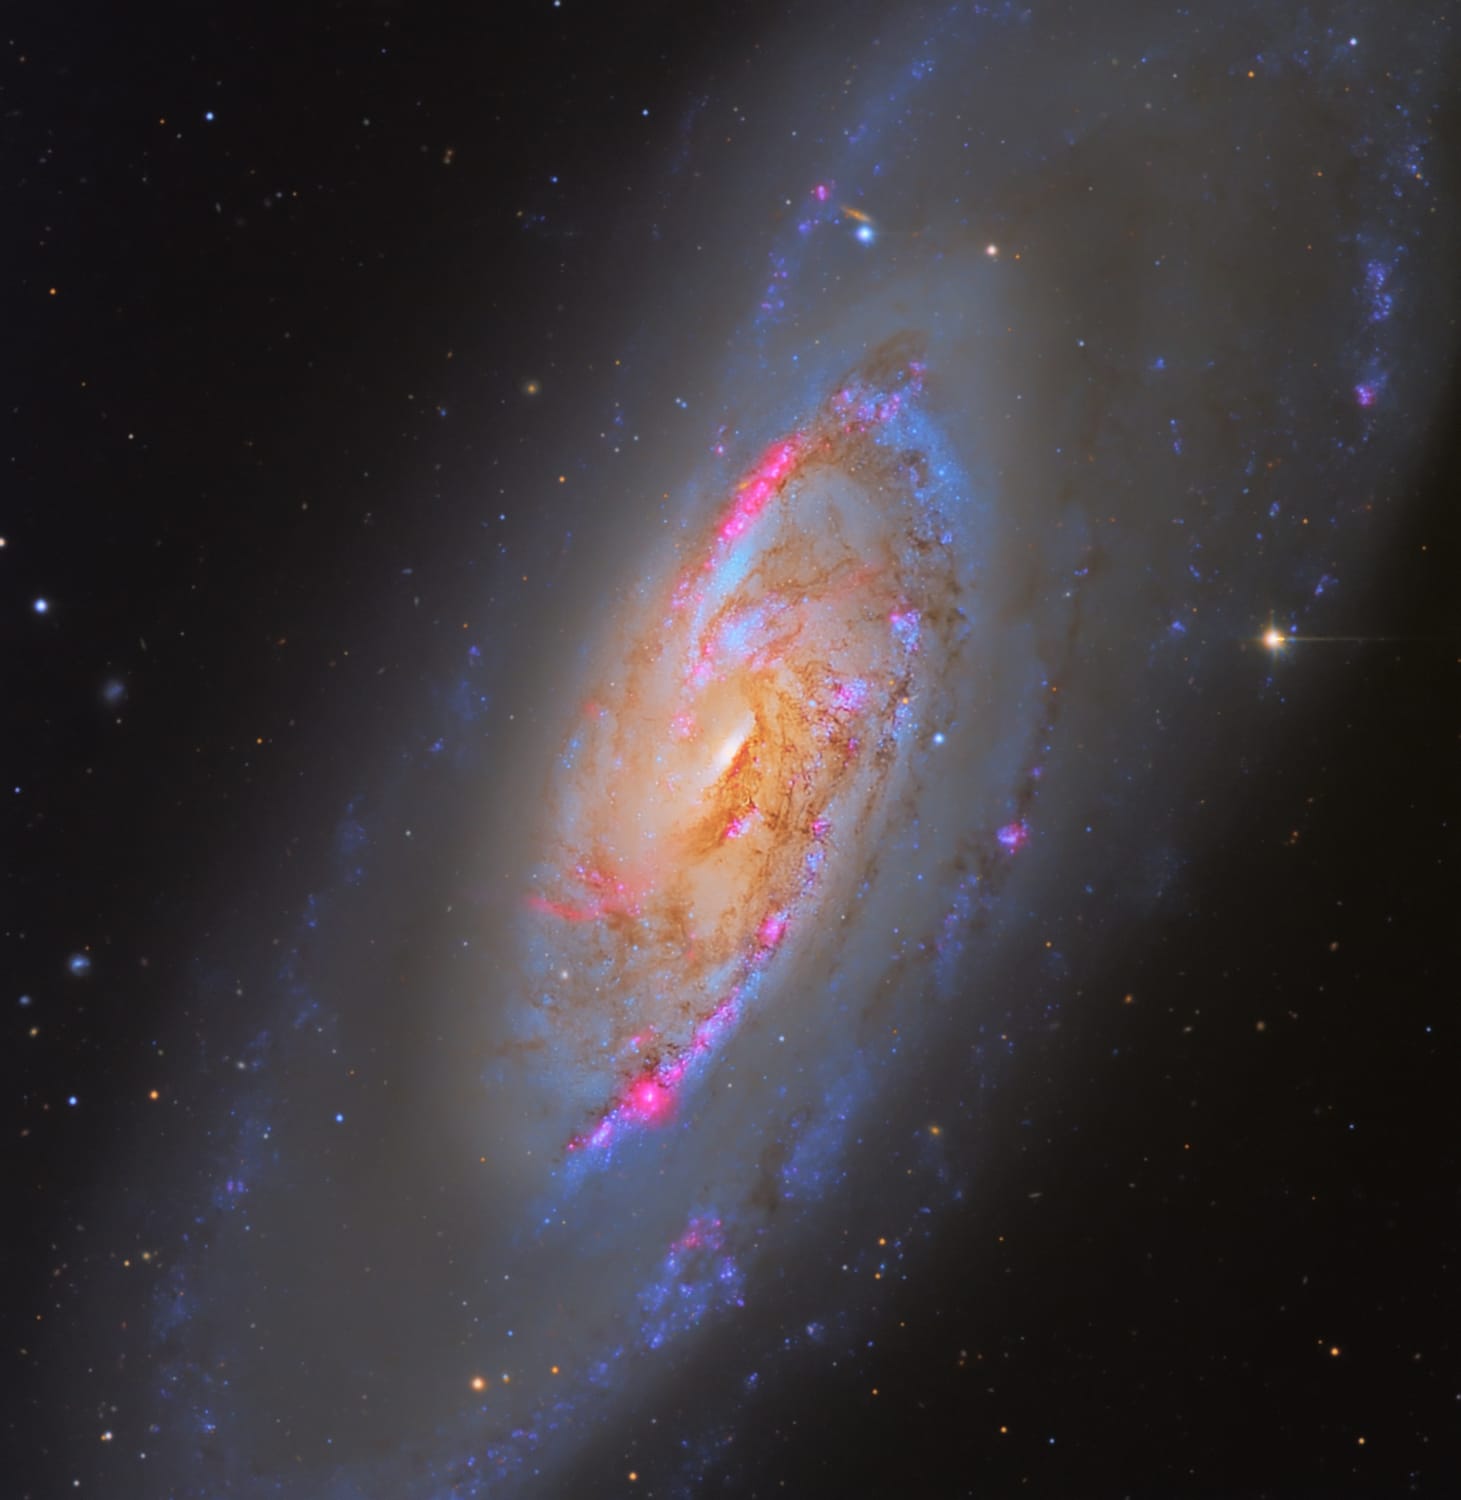 I teamed up with a professional observatory to create one of the sharpest images this galaxy ever taken